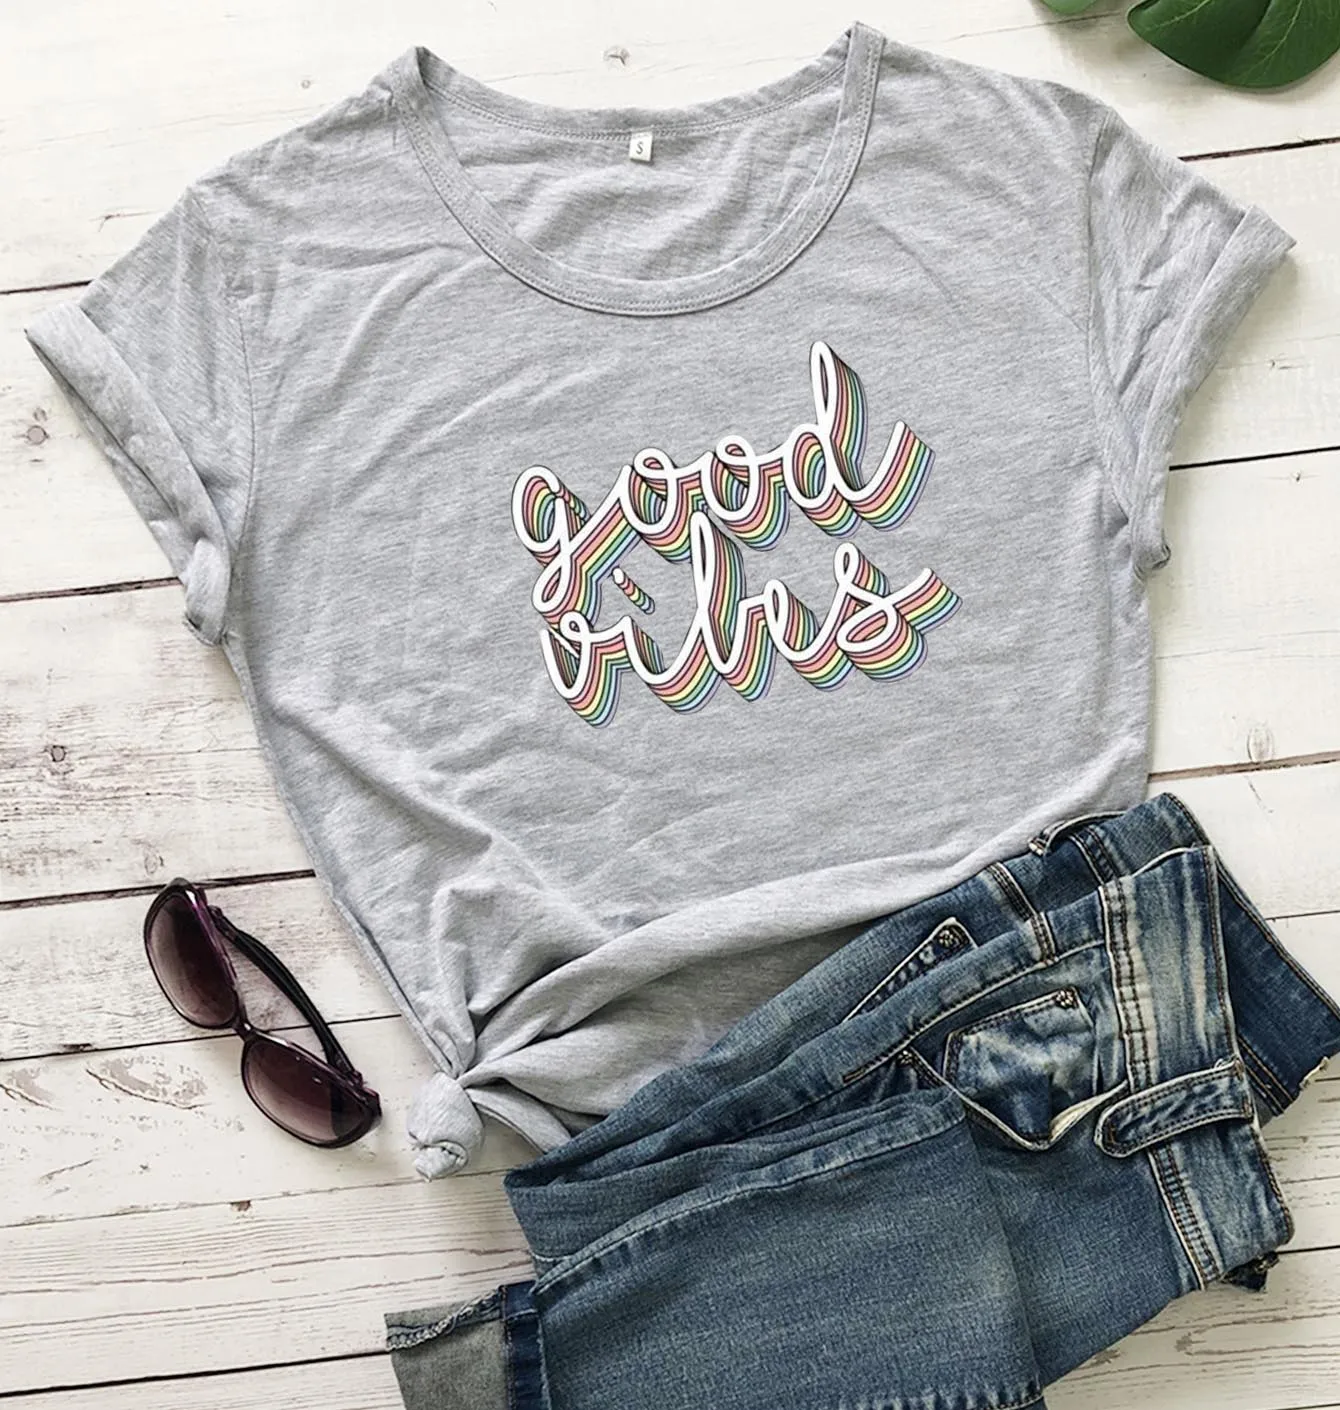 Good vibes graphic women fashion pure cotton casual funny cute kawaii young hipster grunge tumblr t shirt party gift tees tops